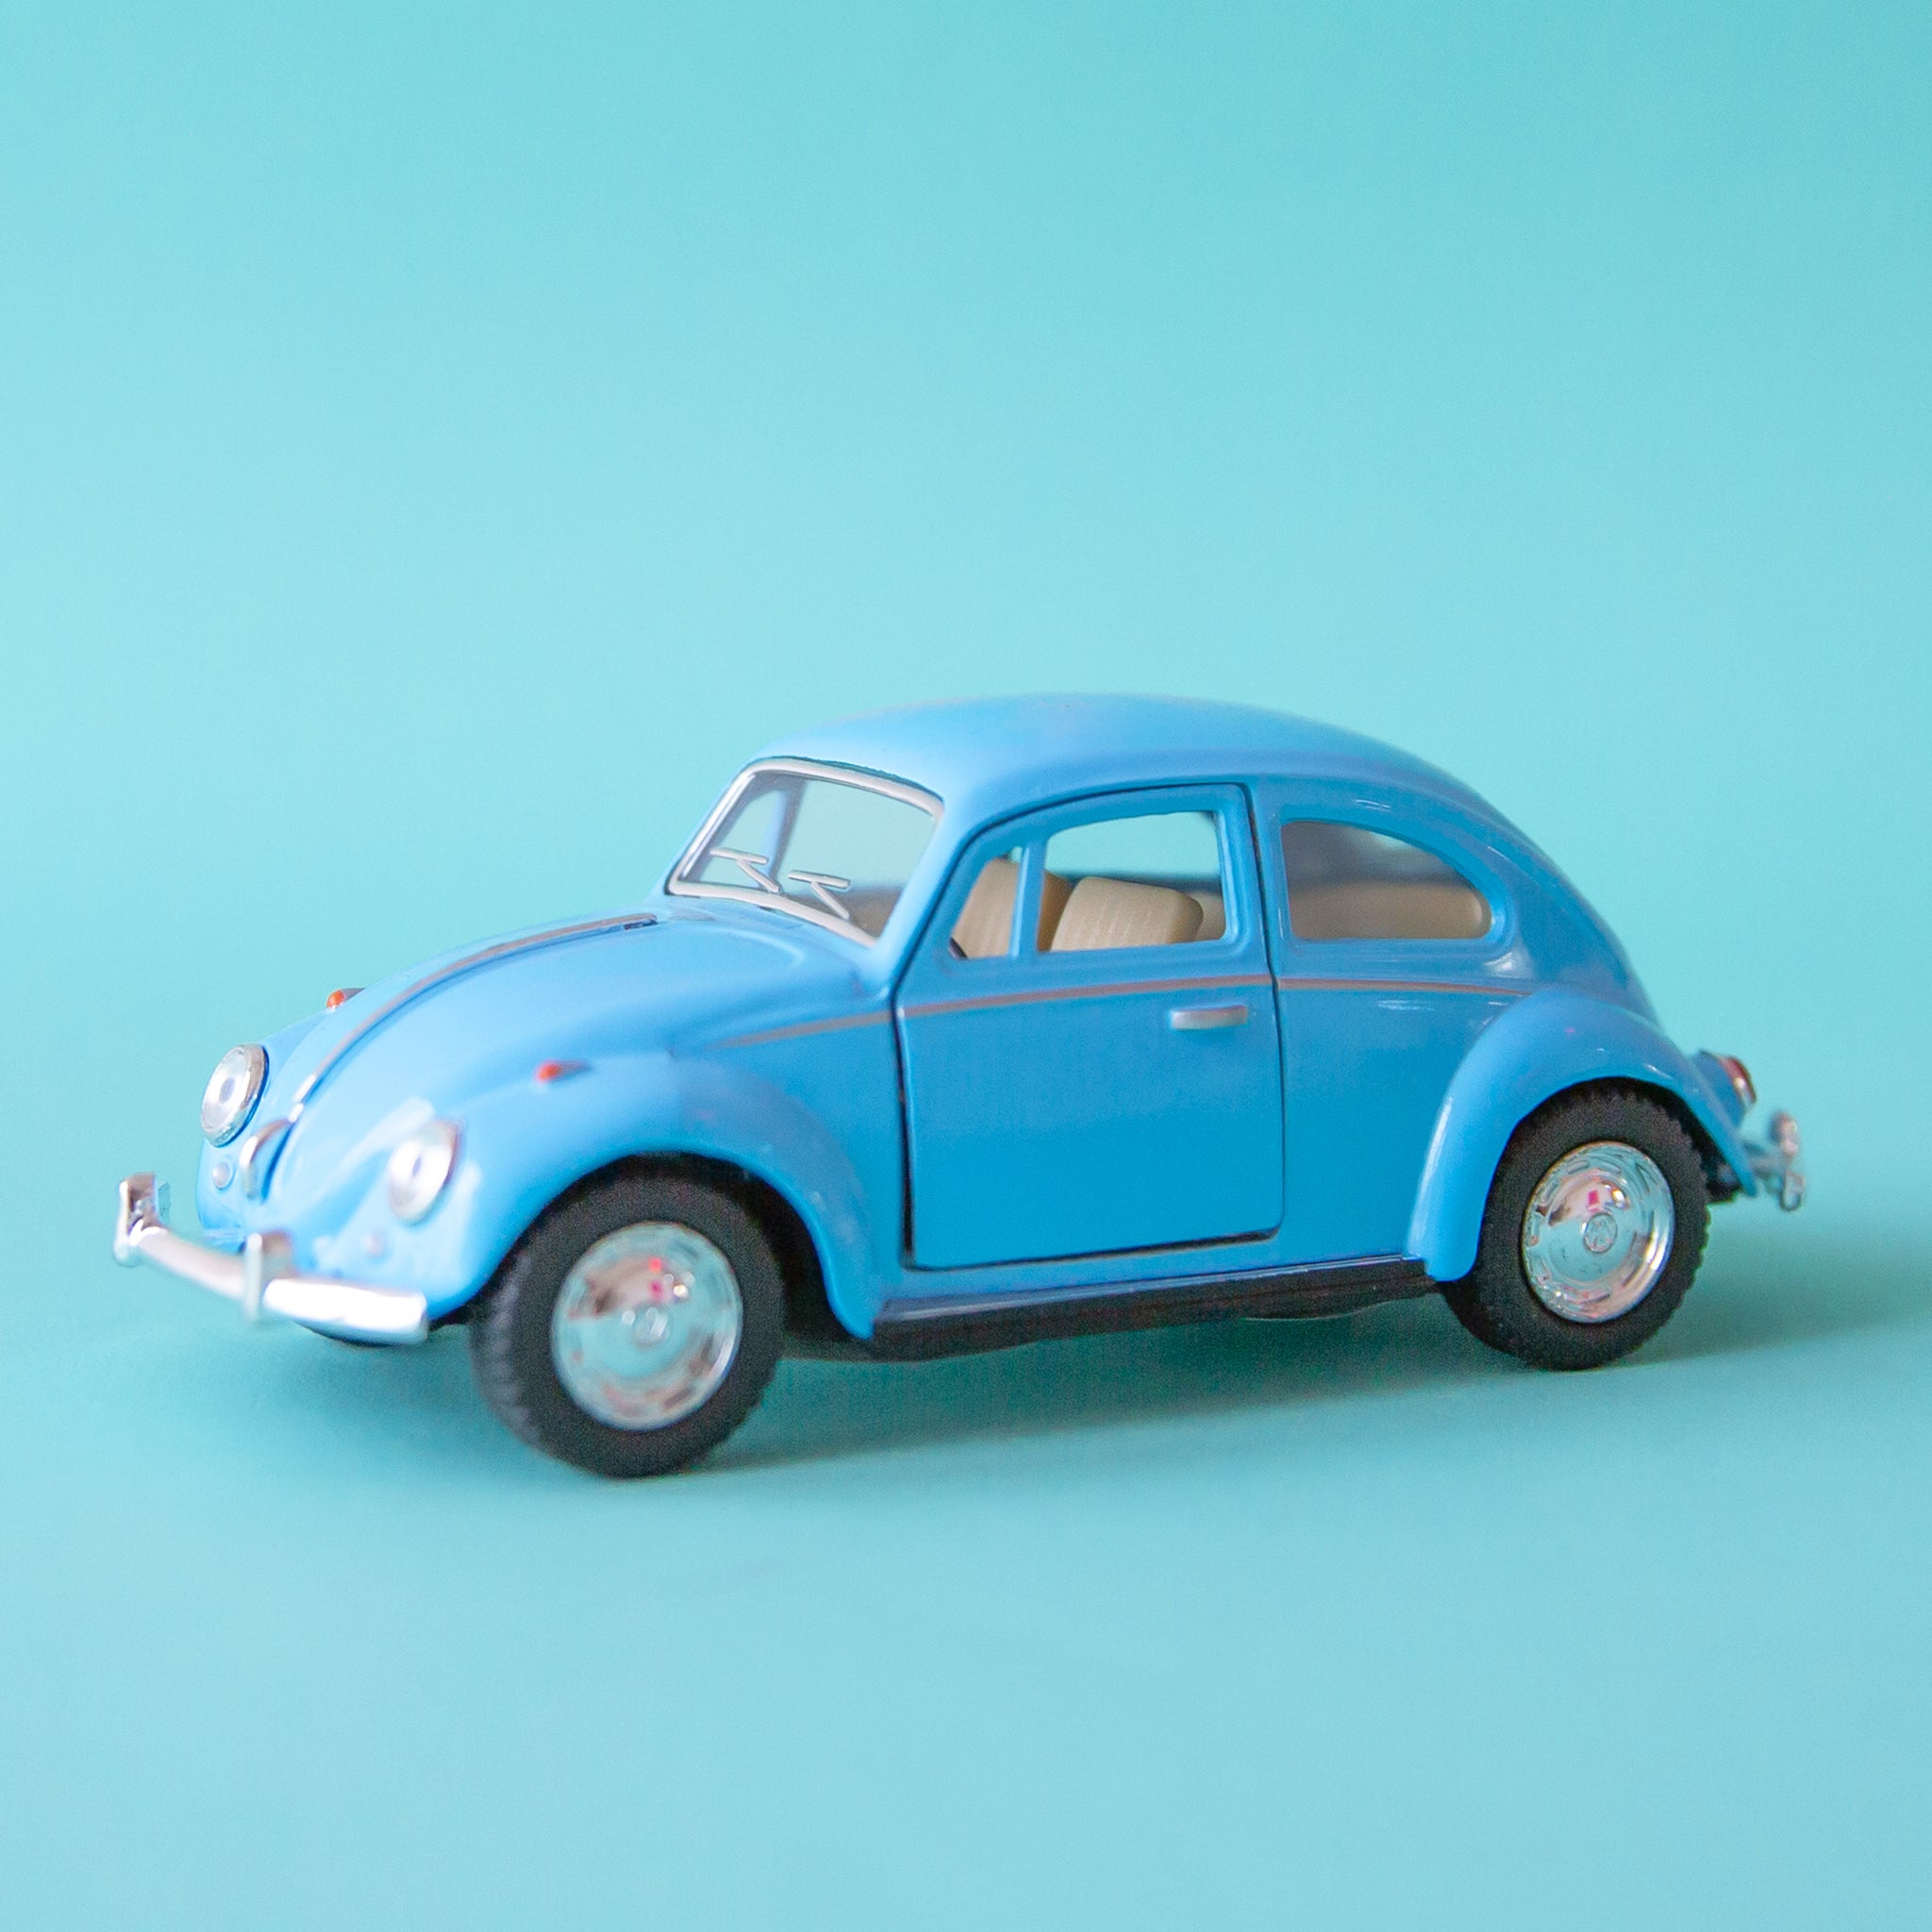 On a blue background is a blue VW beetle toy car. 